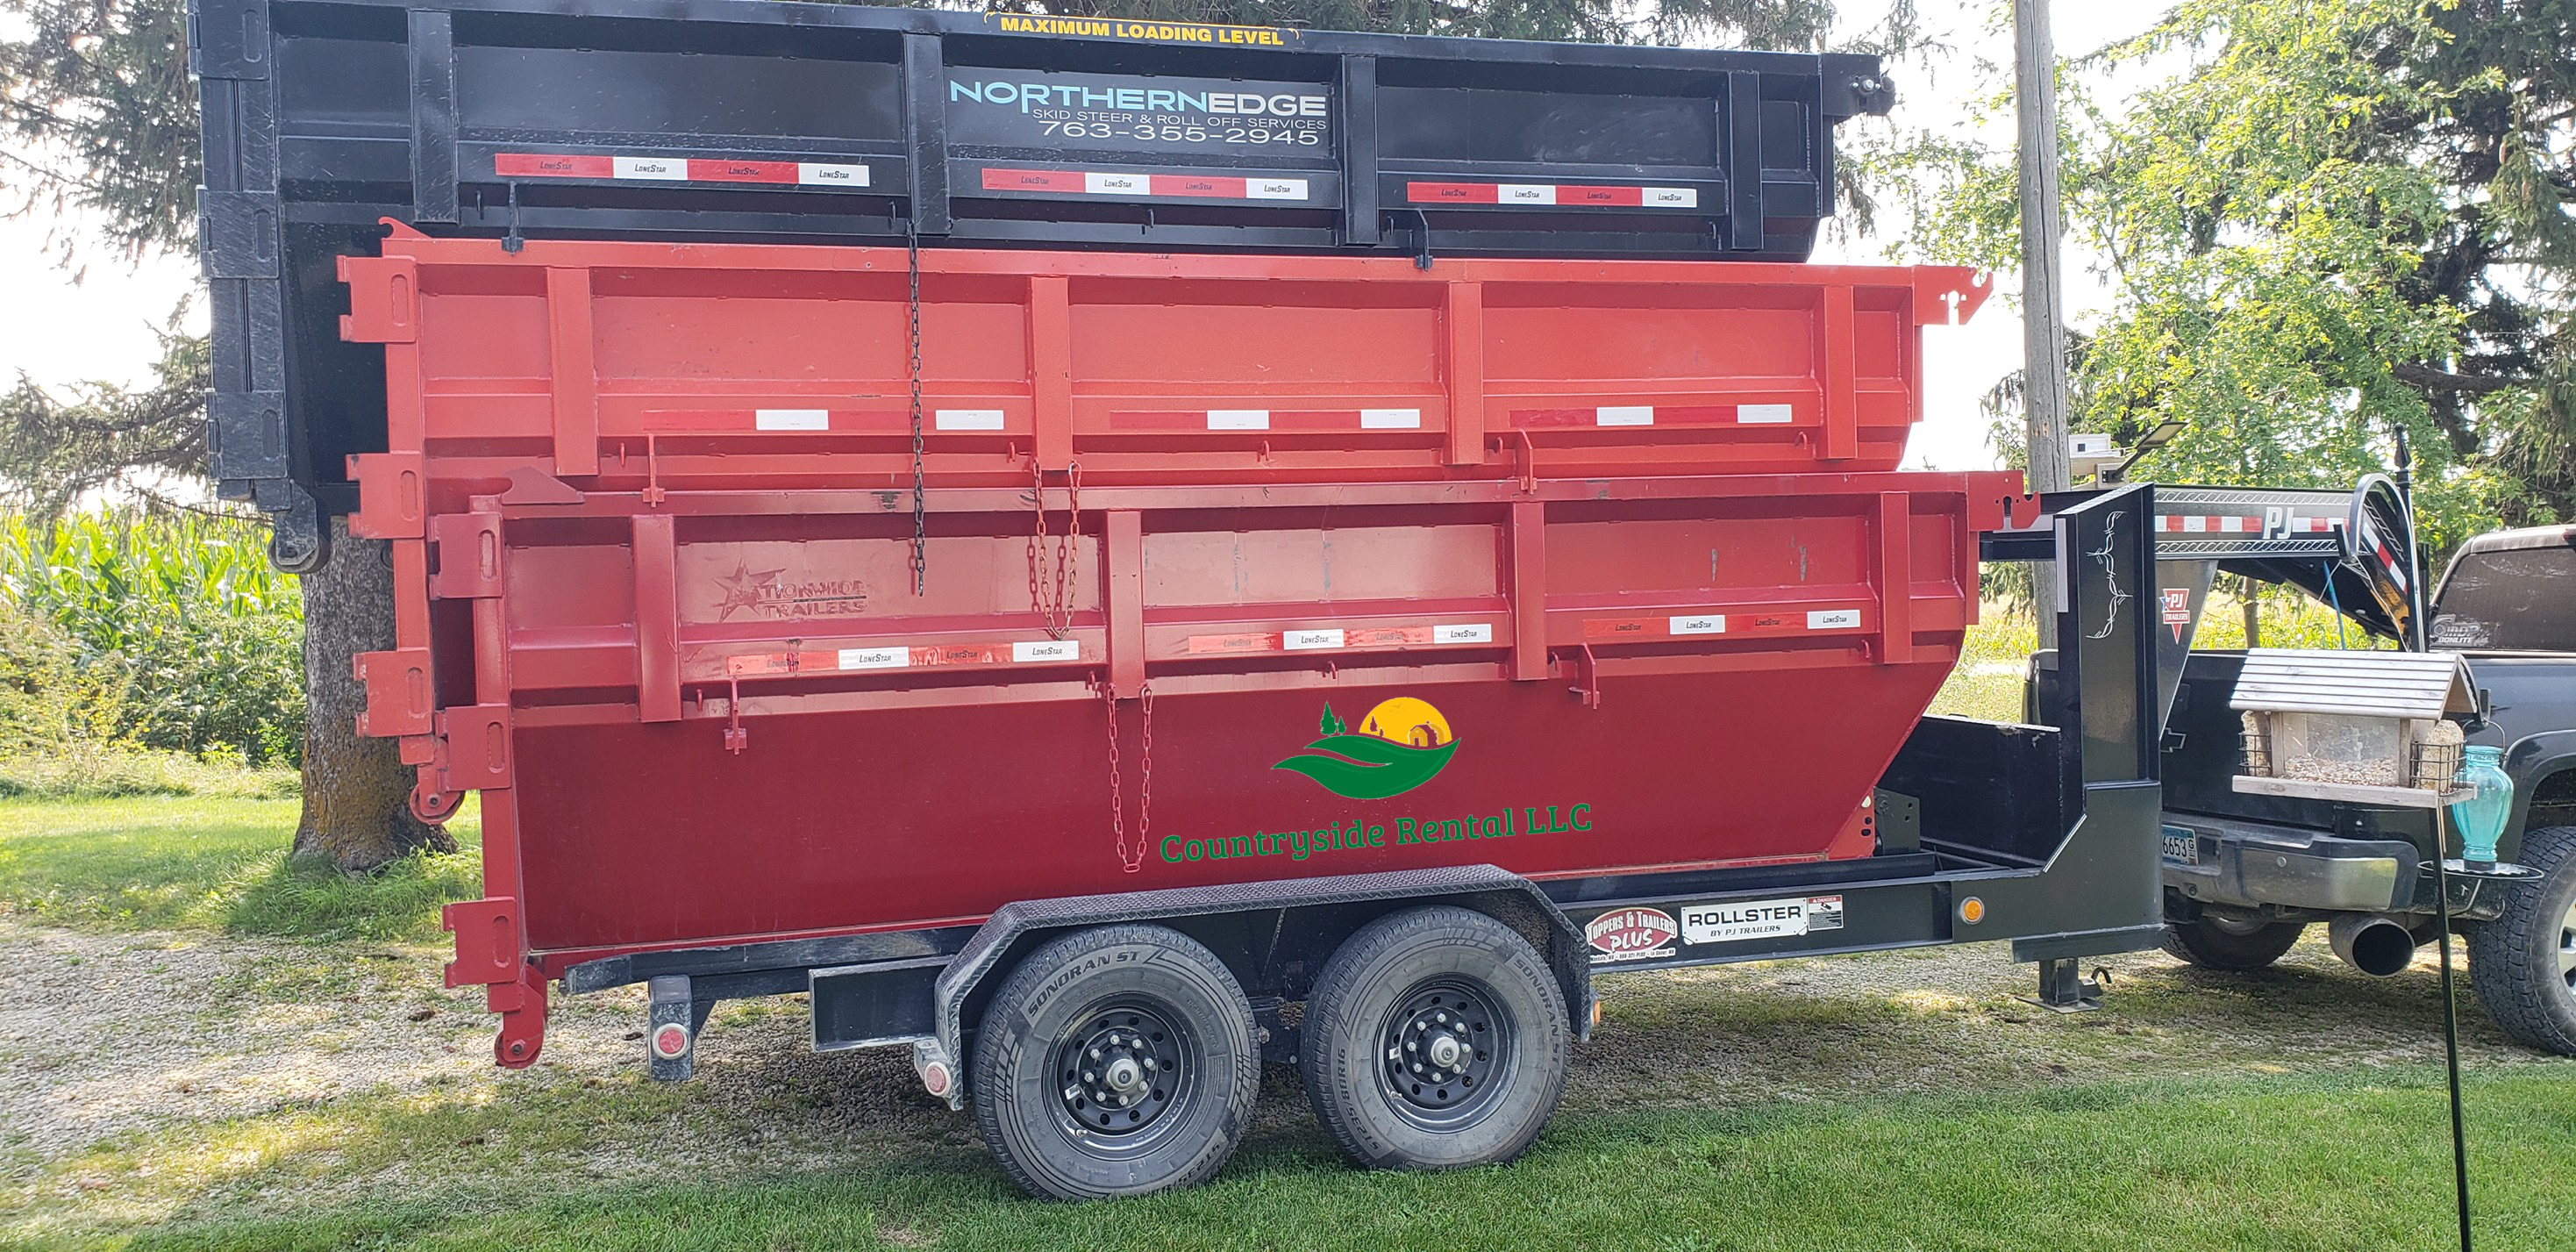 Commercial Dumpster Rental Countryside Rentals Faribault MN